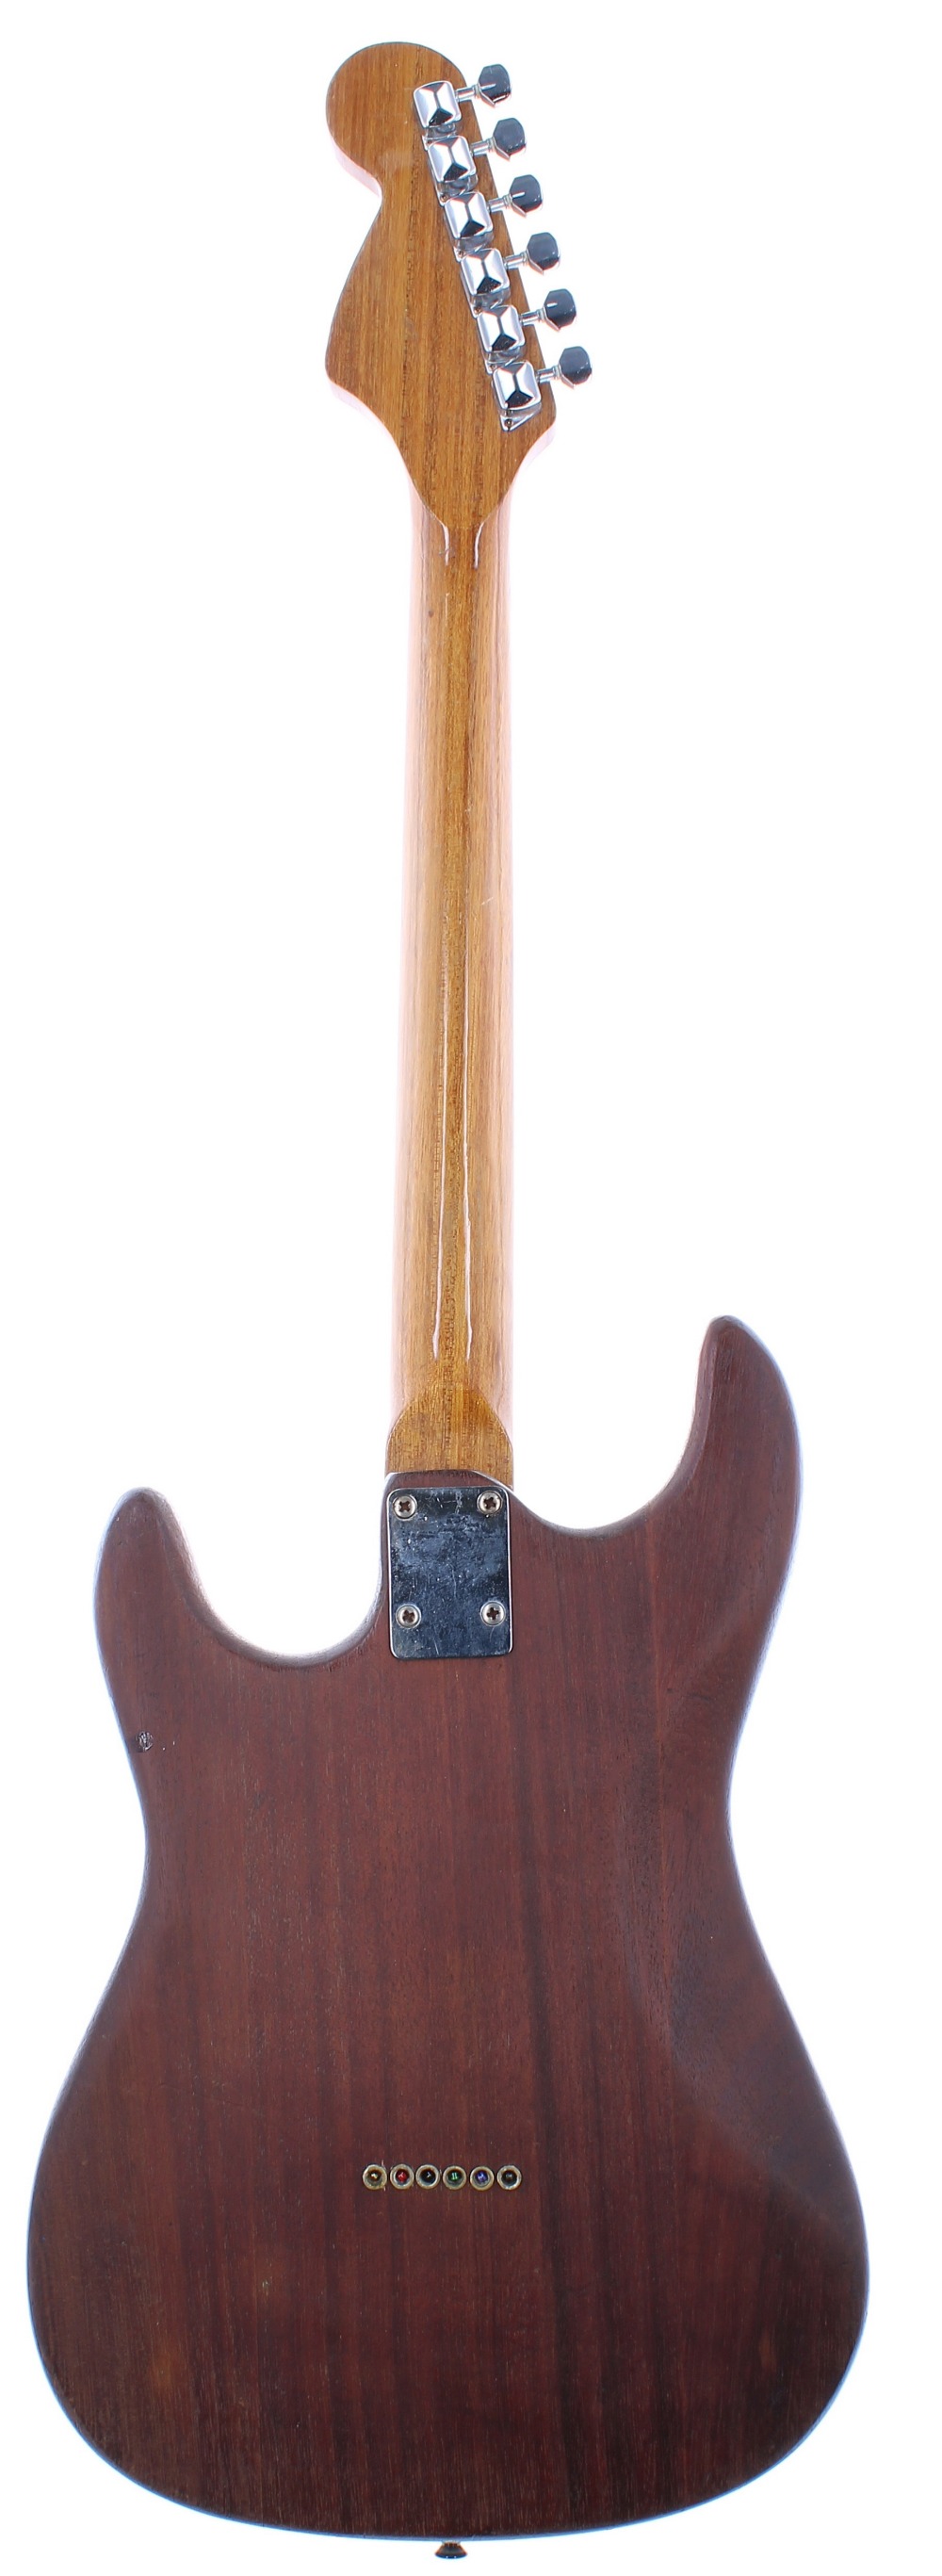 1970s Japanese made Strat style electric guitar, with stripped and varnished body and maple neck, - Image 2 of 2